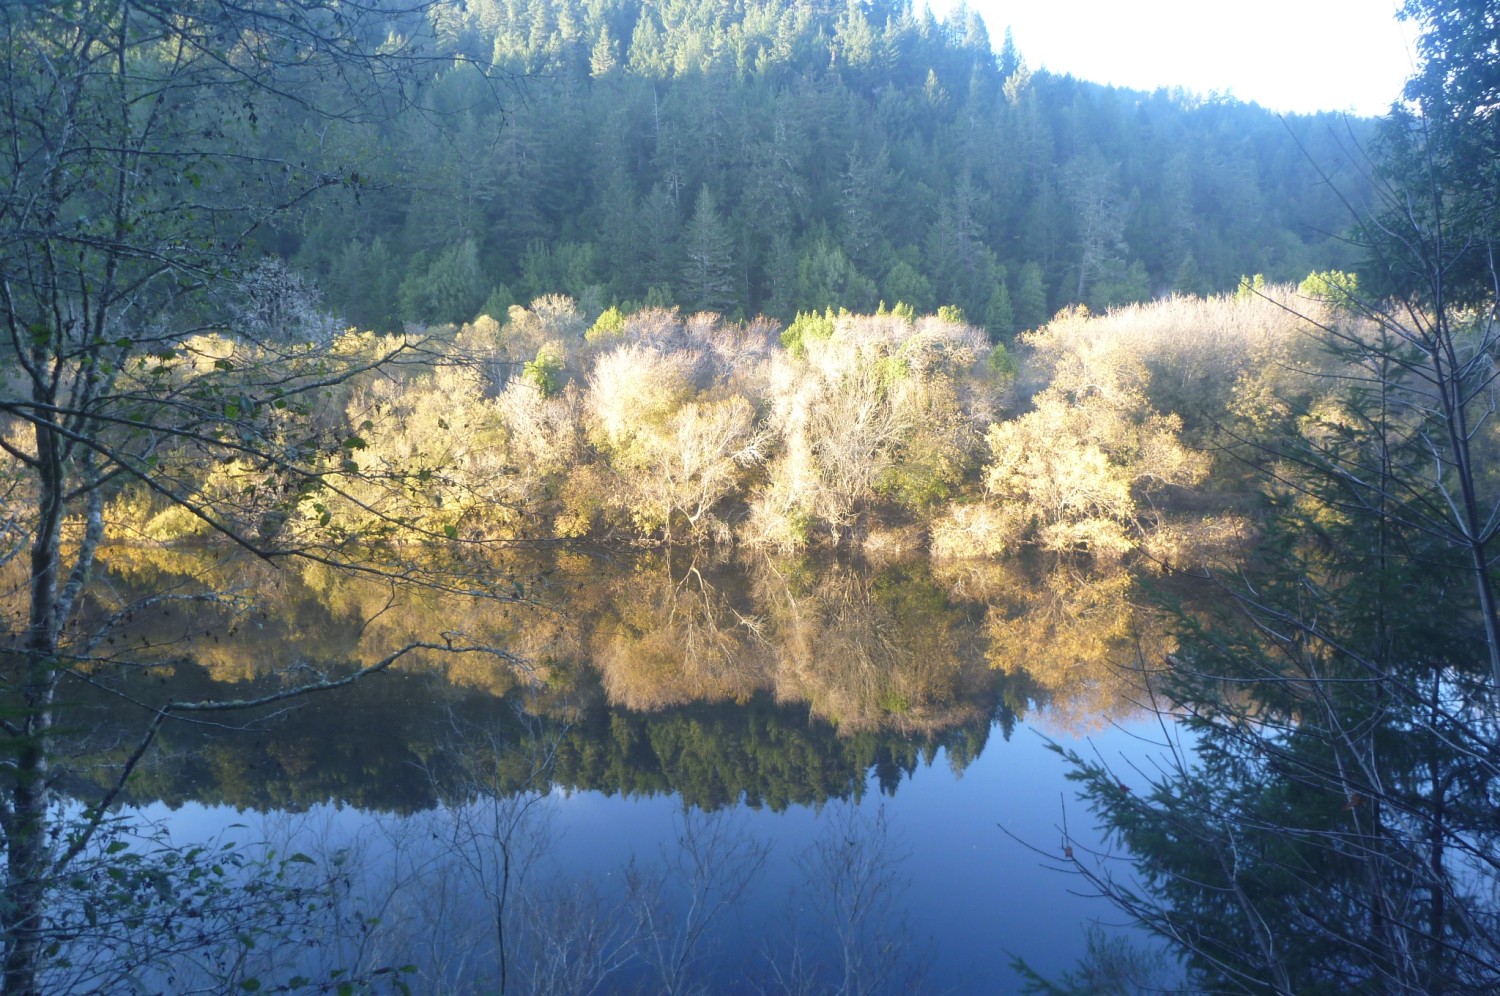 View across Russian River from Moscow Road